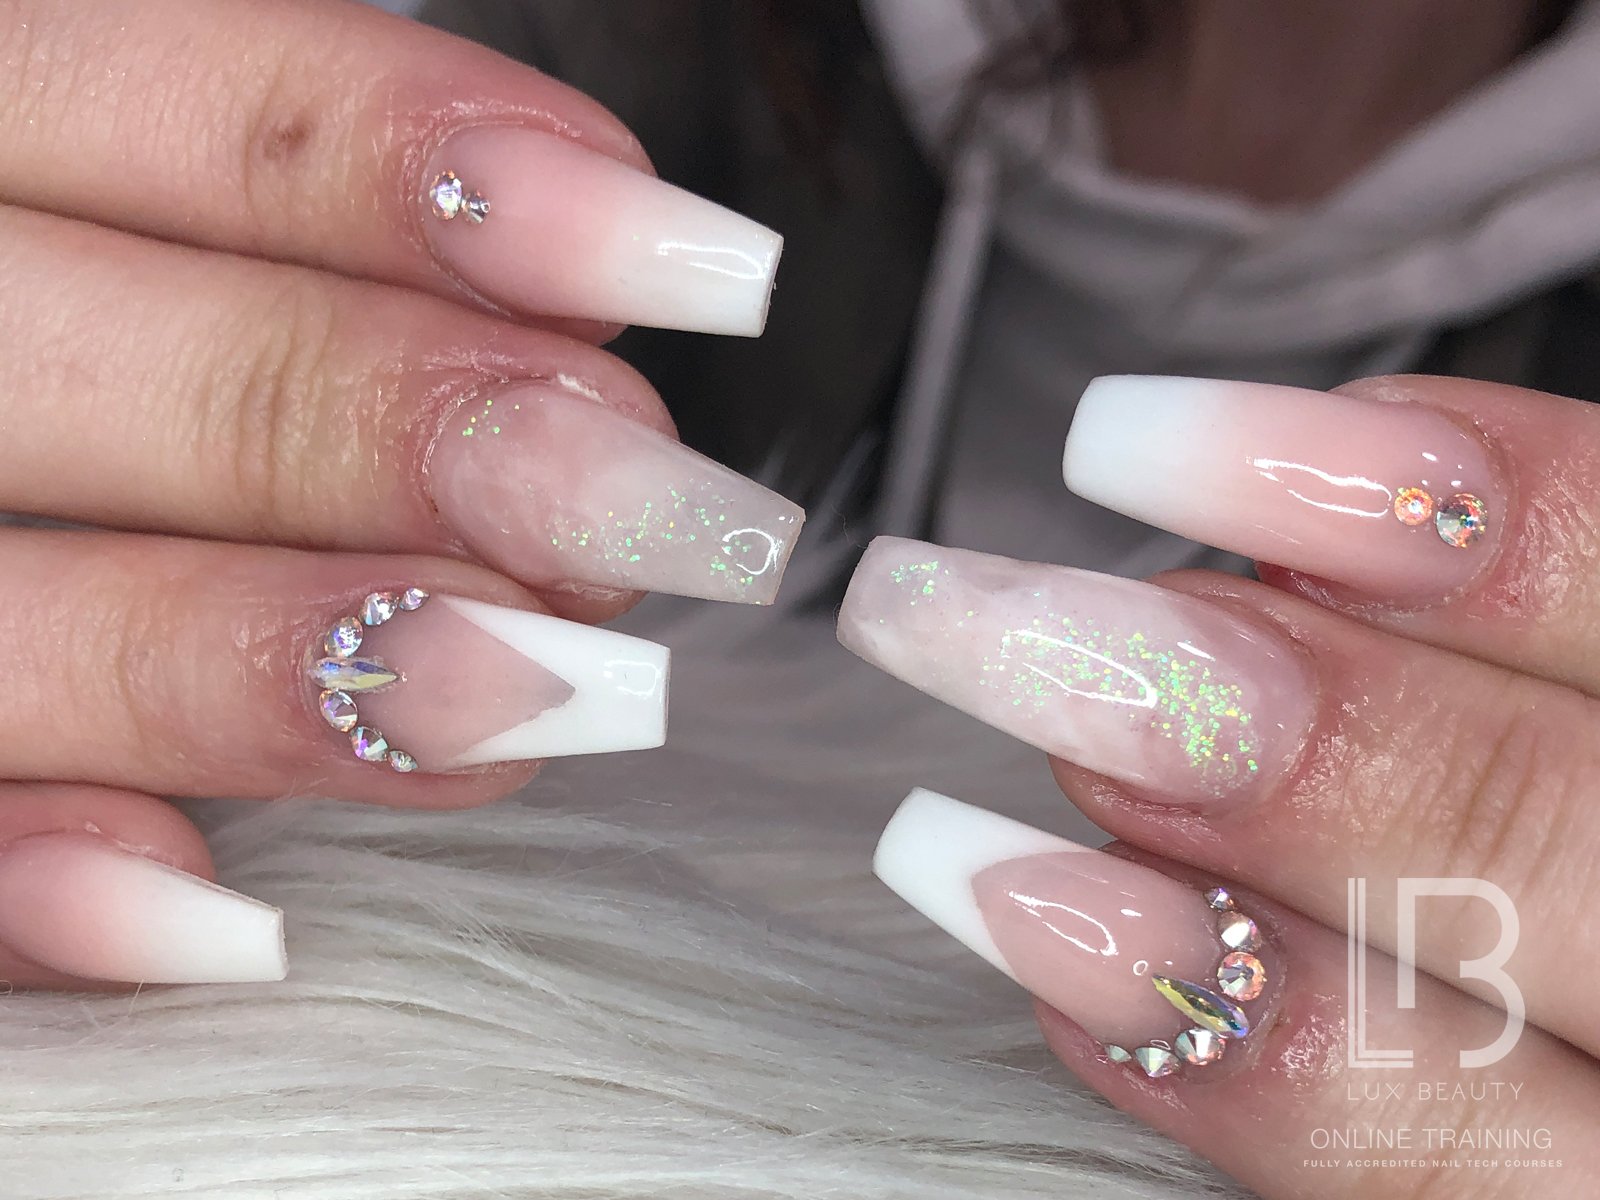 Acrylic Nail Extension Course Online - LUX Beauty Training Academy